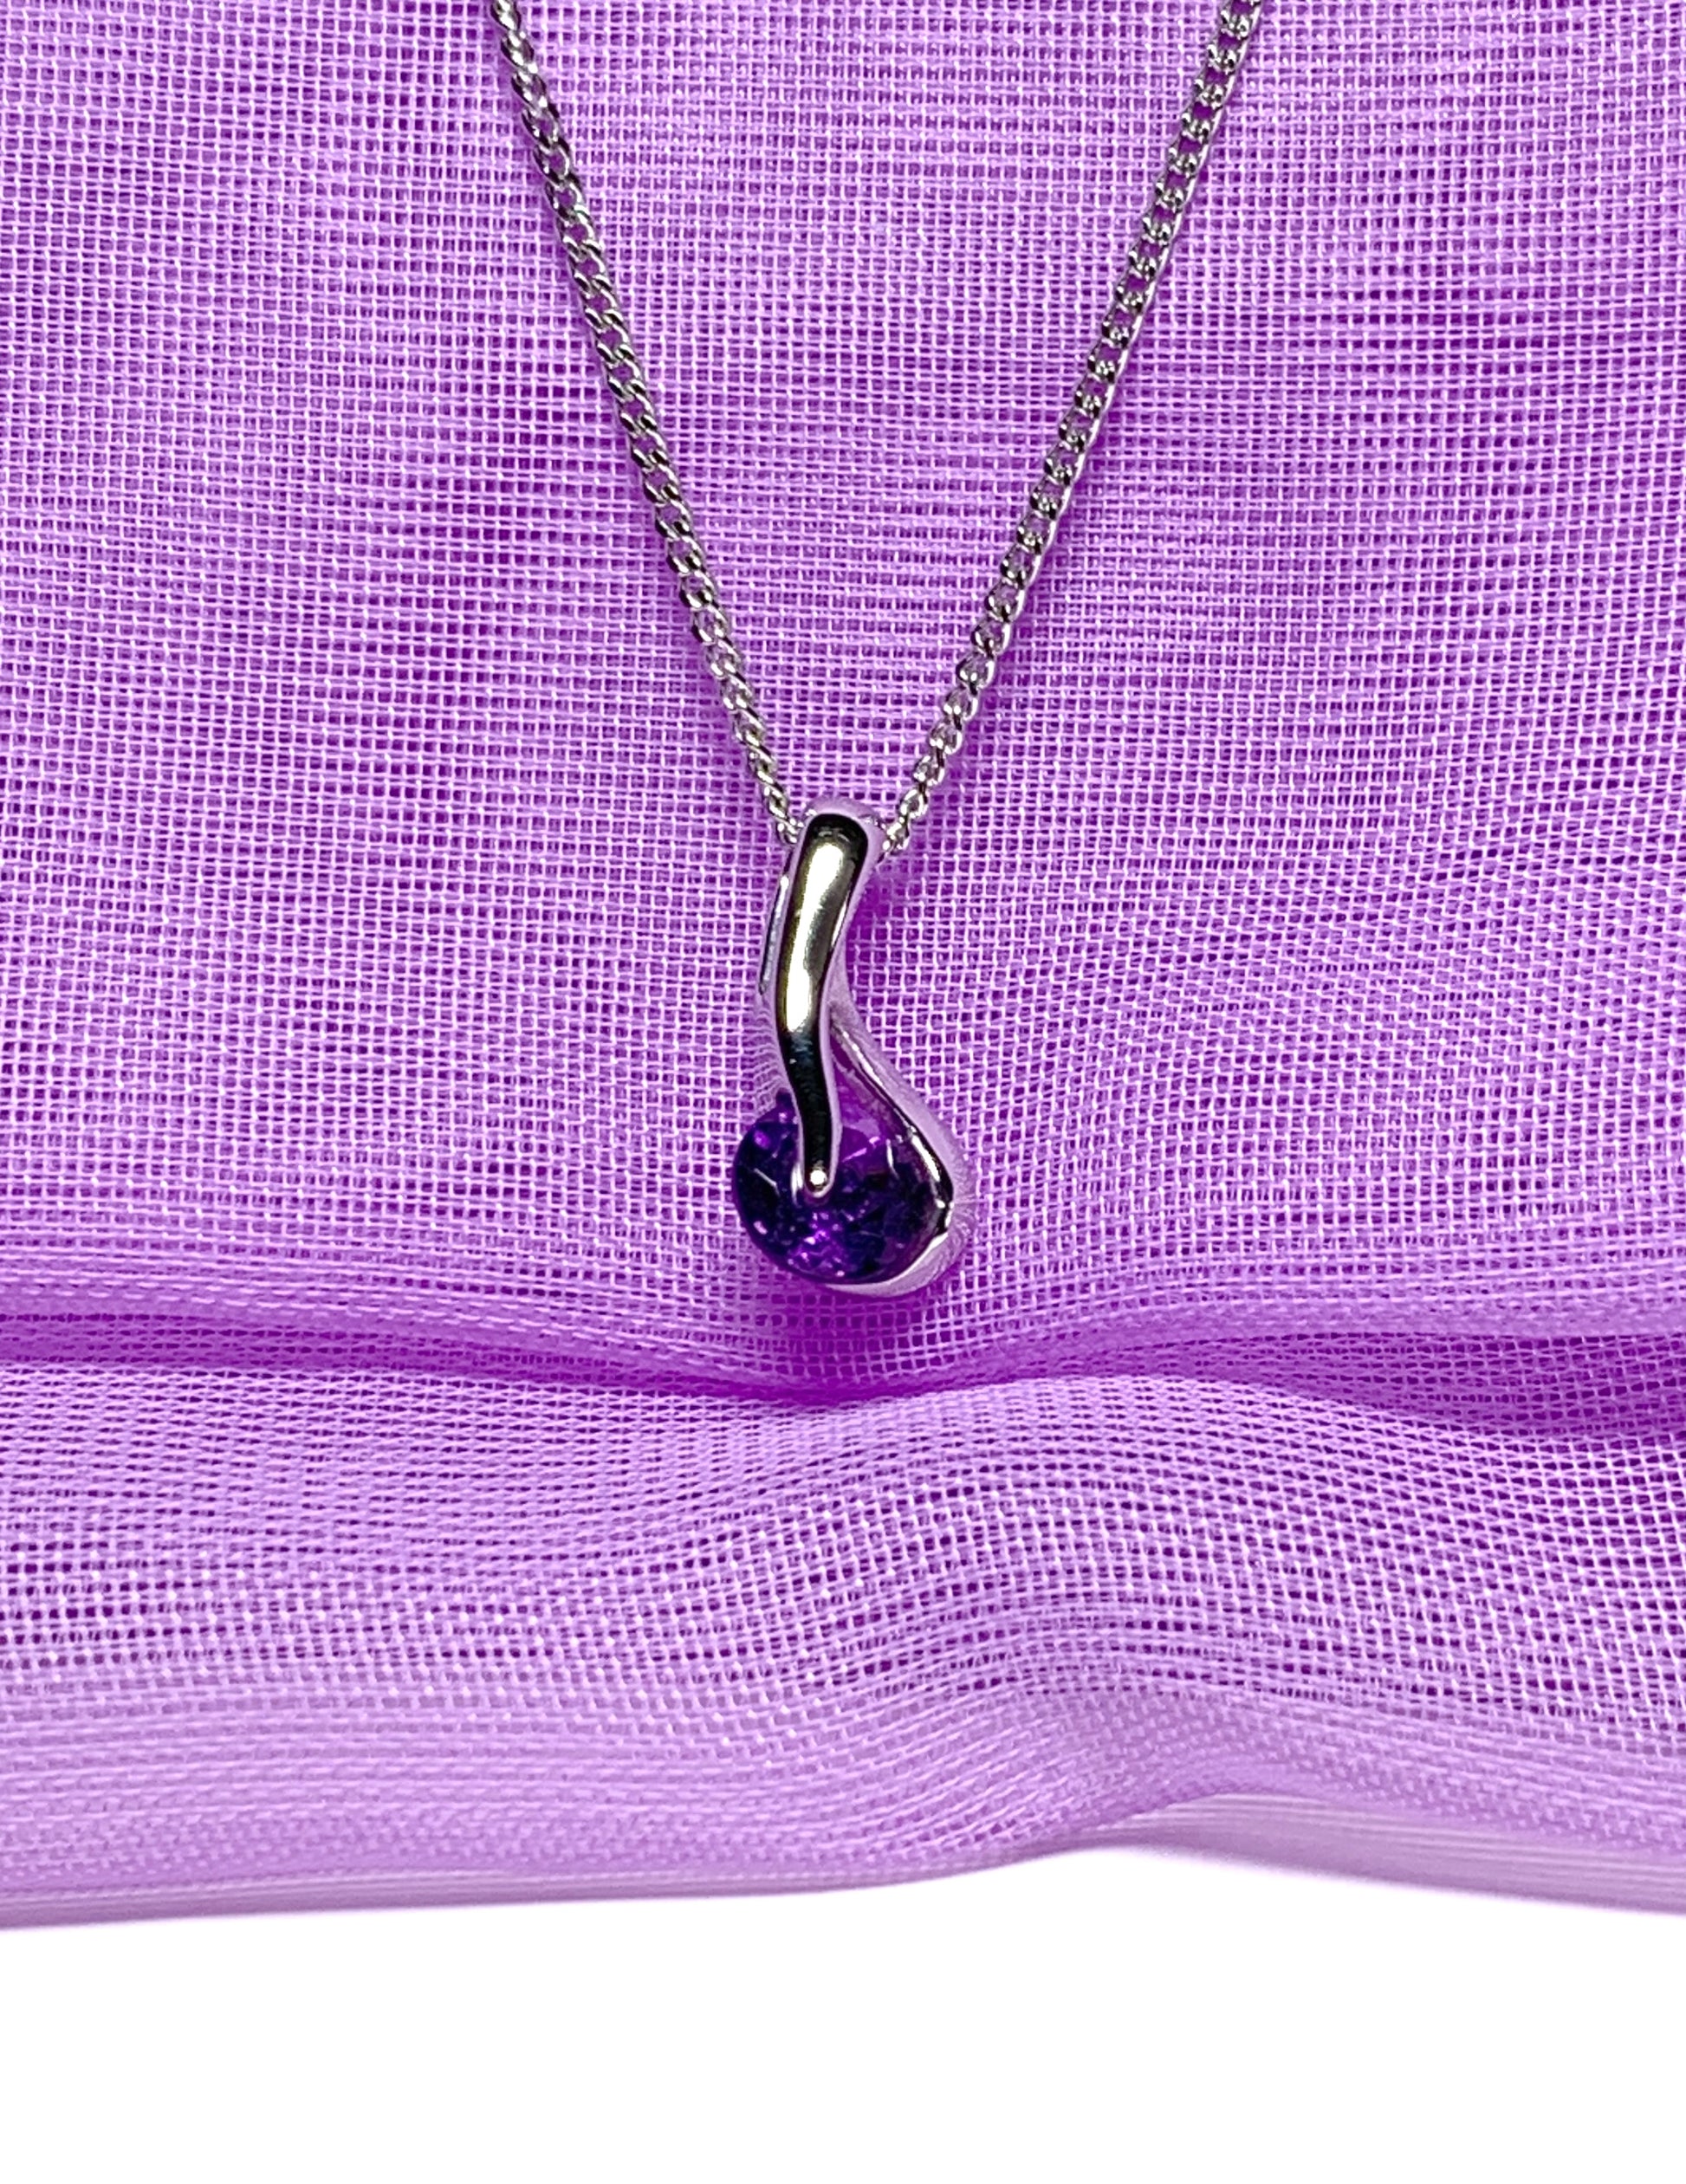 Real purple amethyst white gold necklace